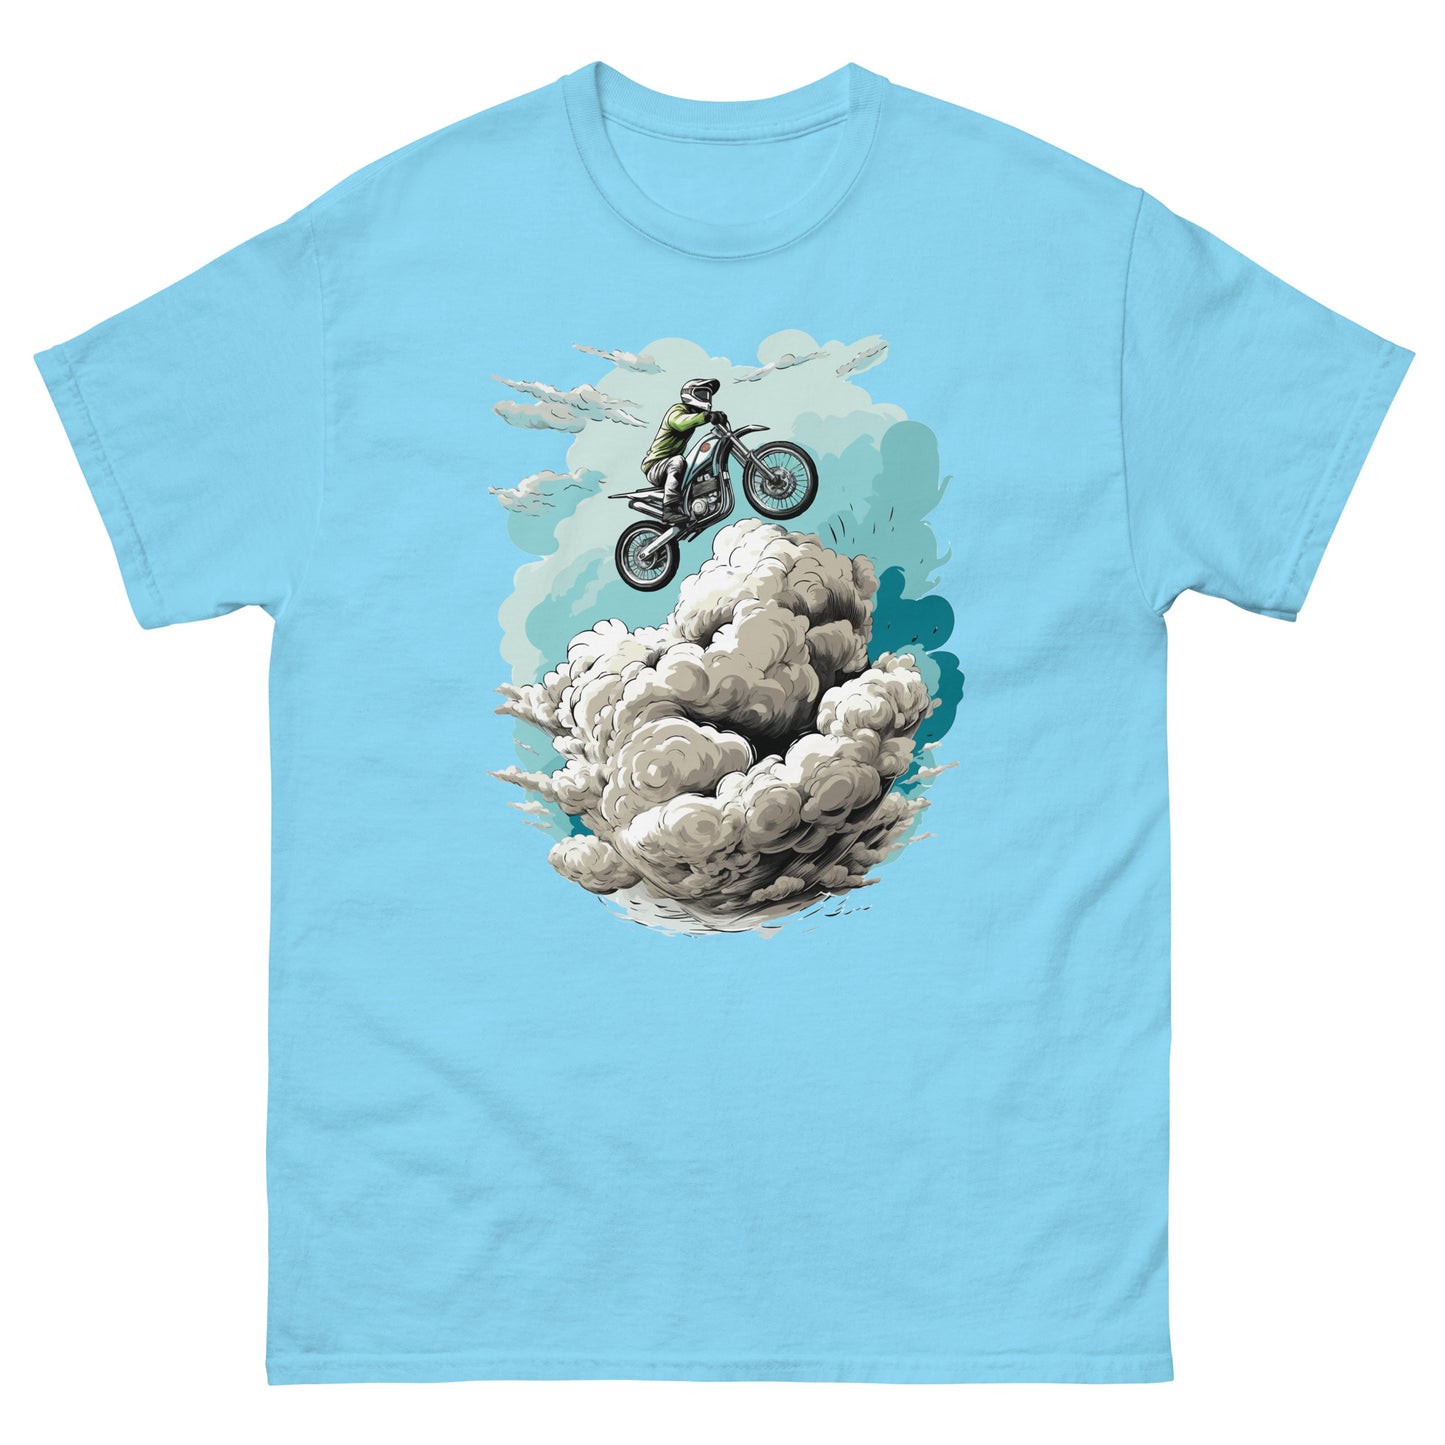 Gift for a motorcyclist, Motorcycle illustration, Motorbike jump above the clouds, Moto race and speed lovers - Men's classic tee